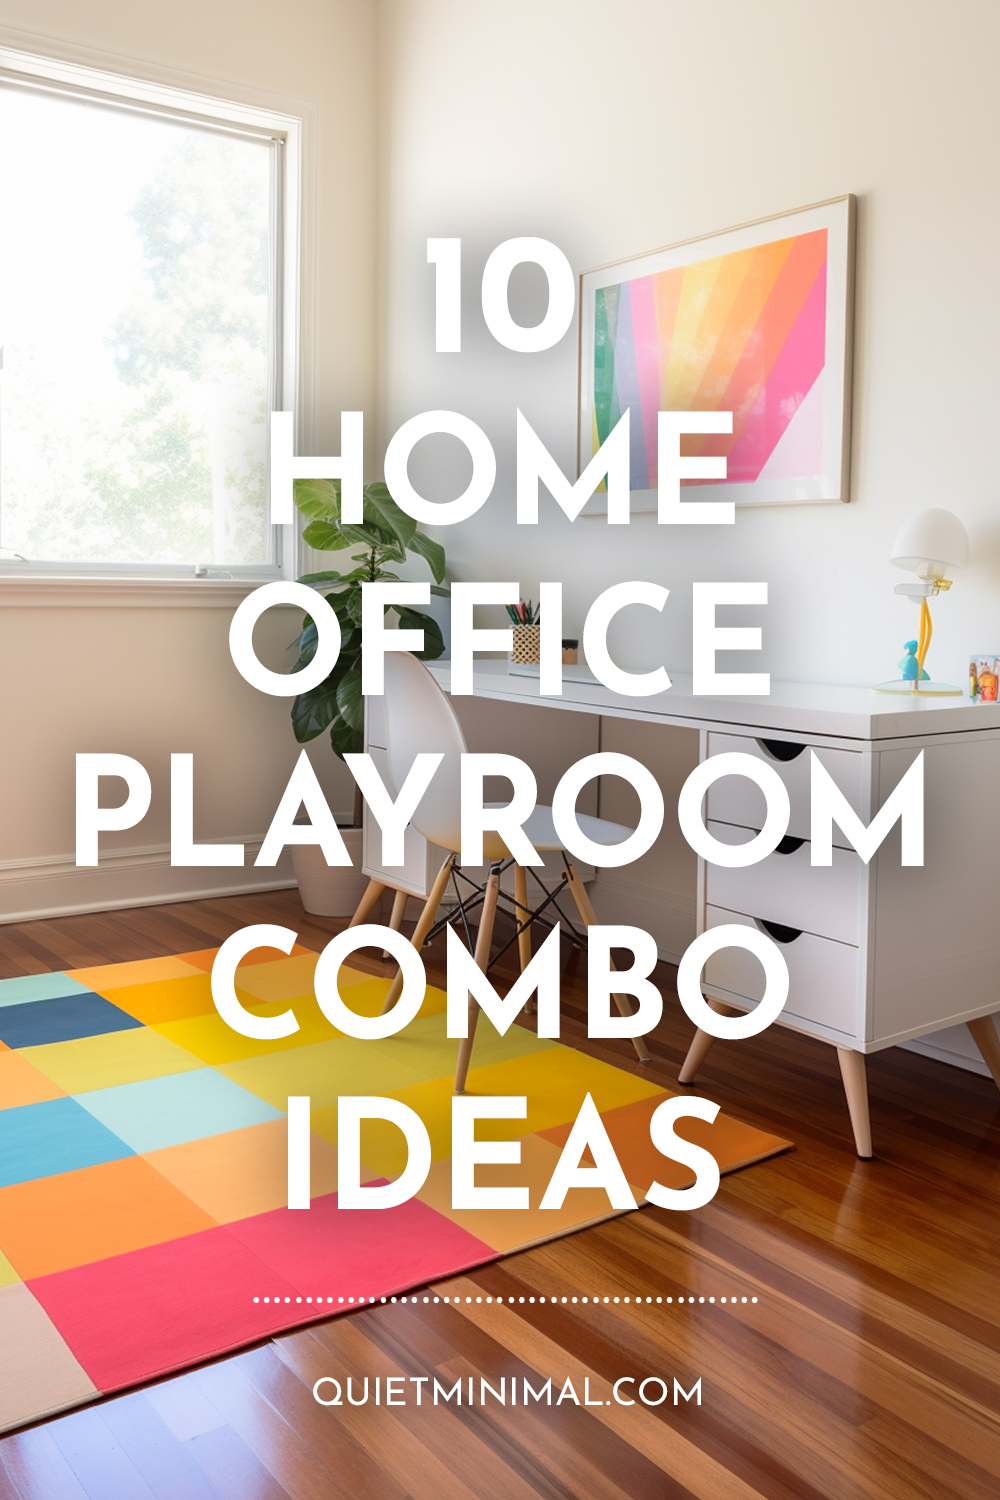 Design Tips: 10 Home Office Playroom Combo Ideas